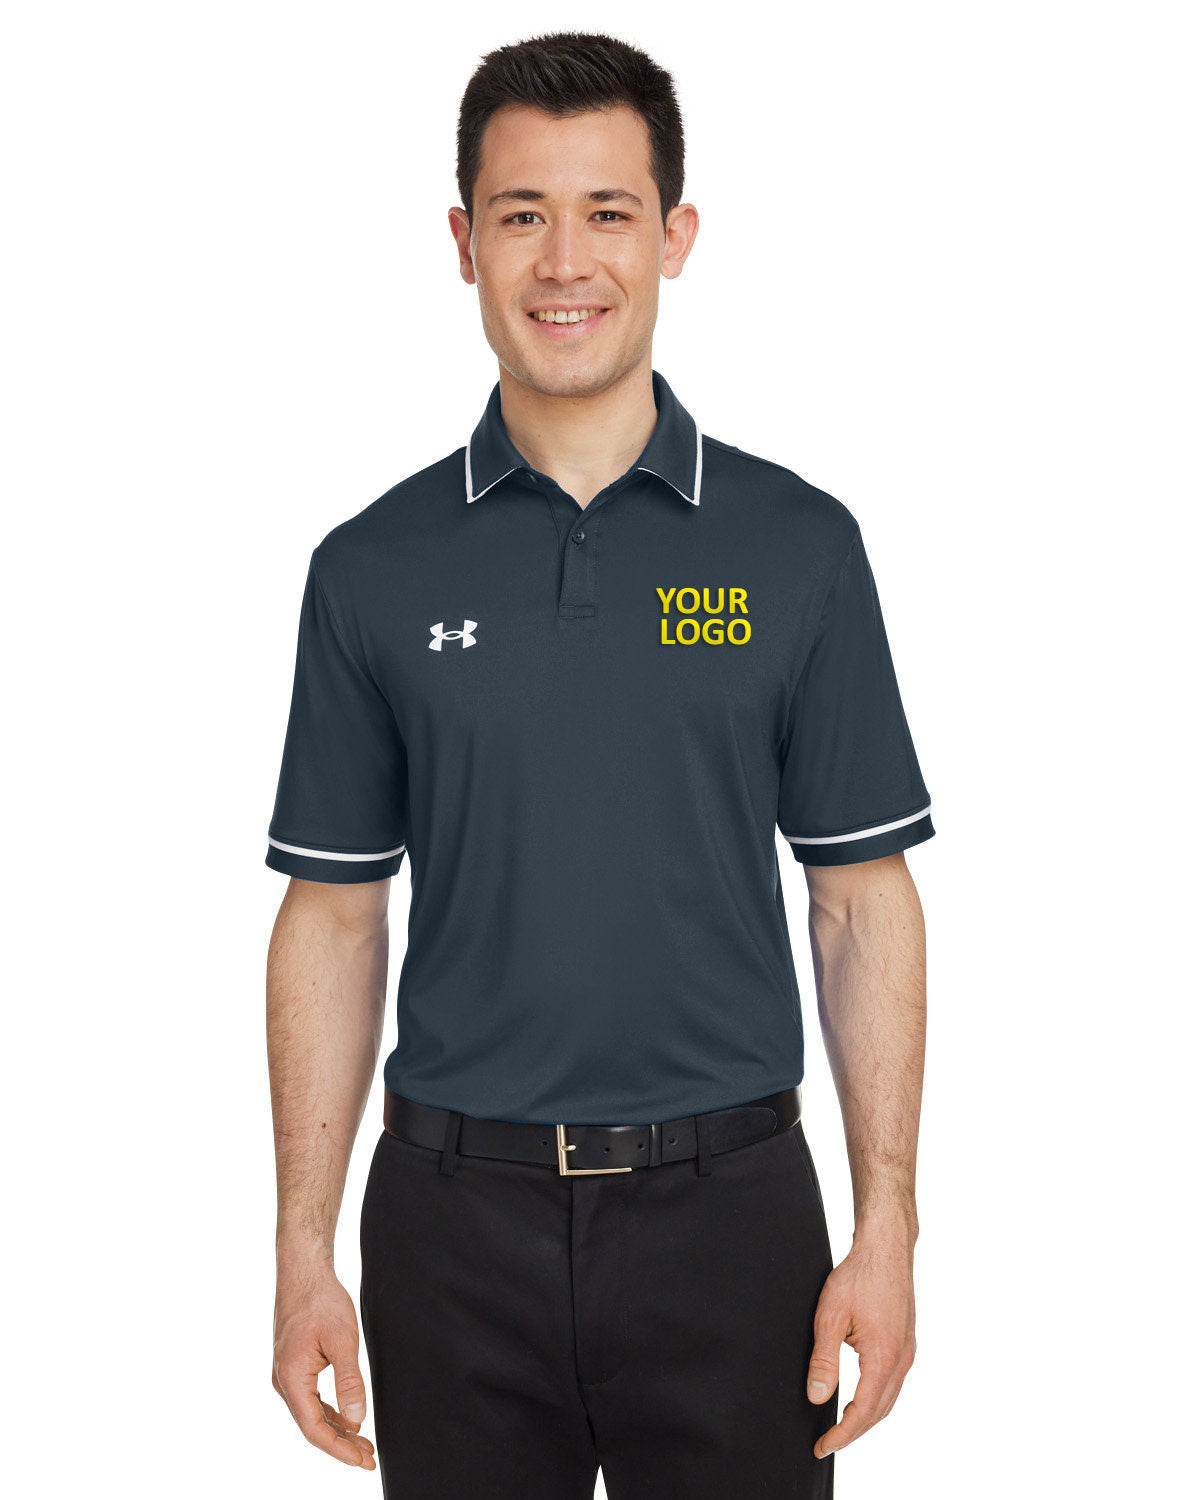 Under Armour Men's Tipped Teams Performance Polo, Stealth Grey